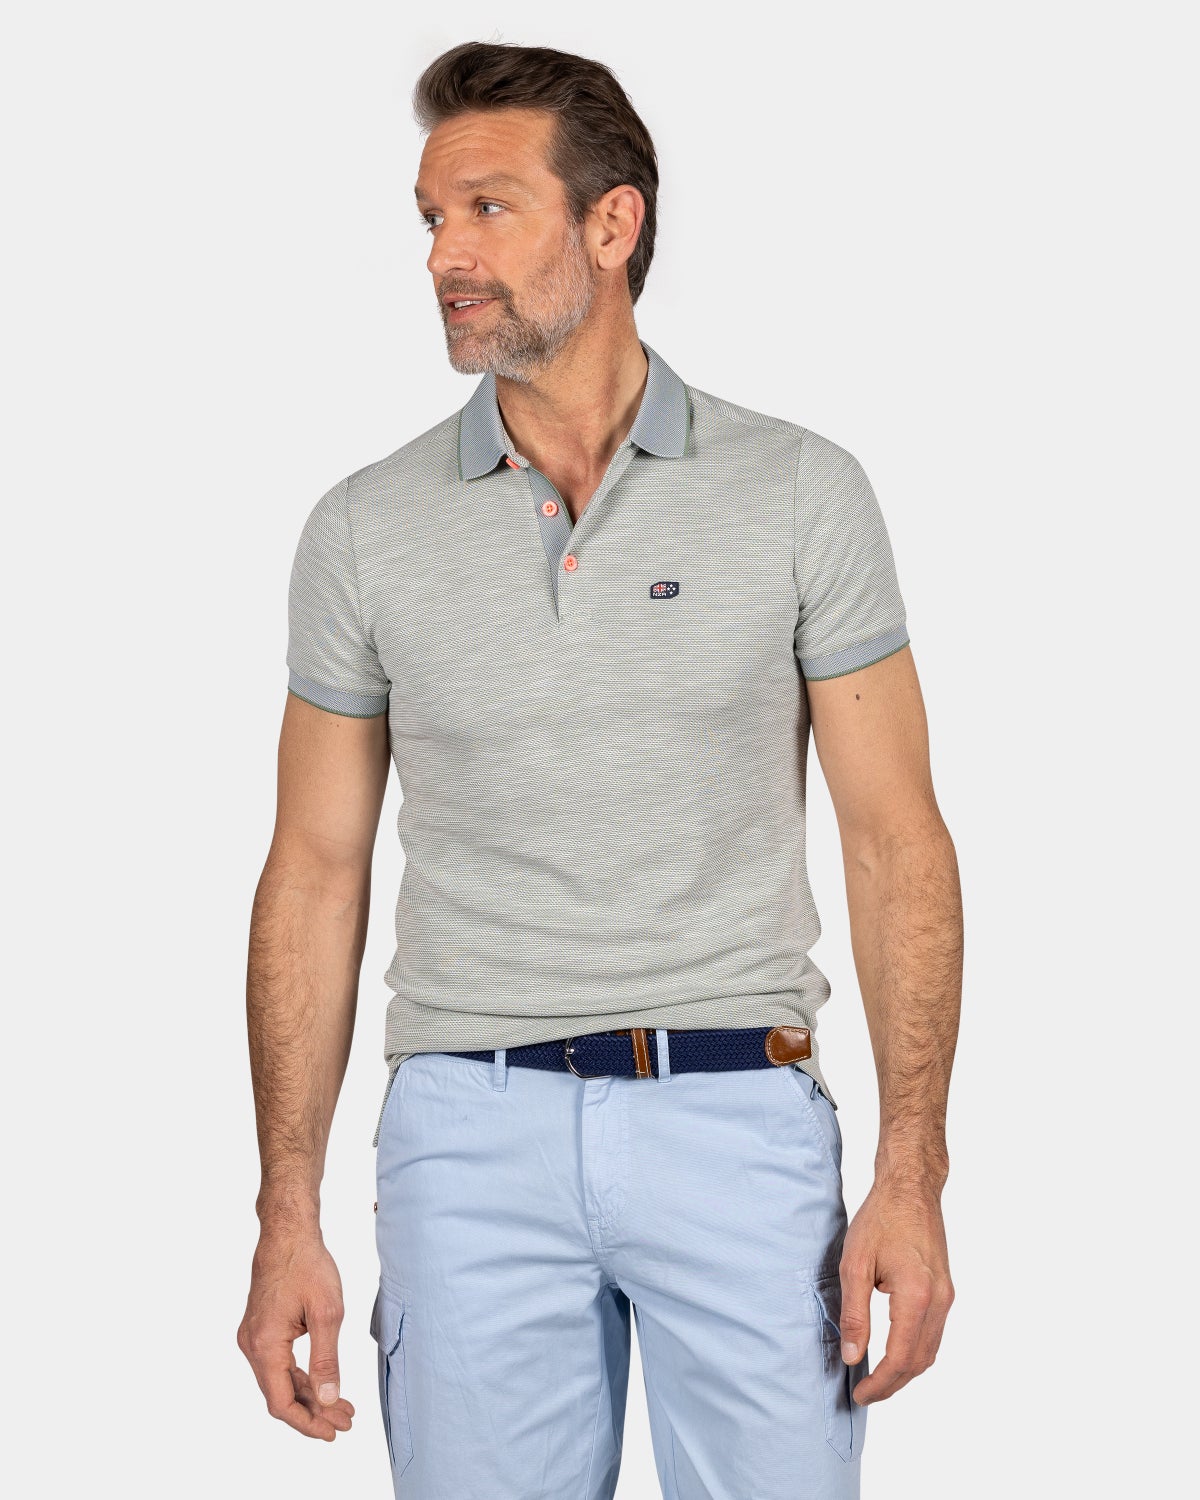 Plain polo made of durable material - Mellow Army